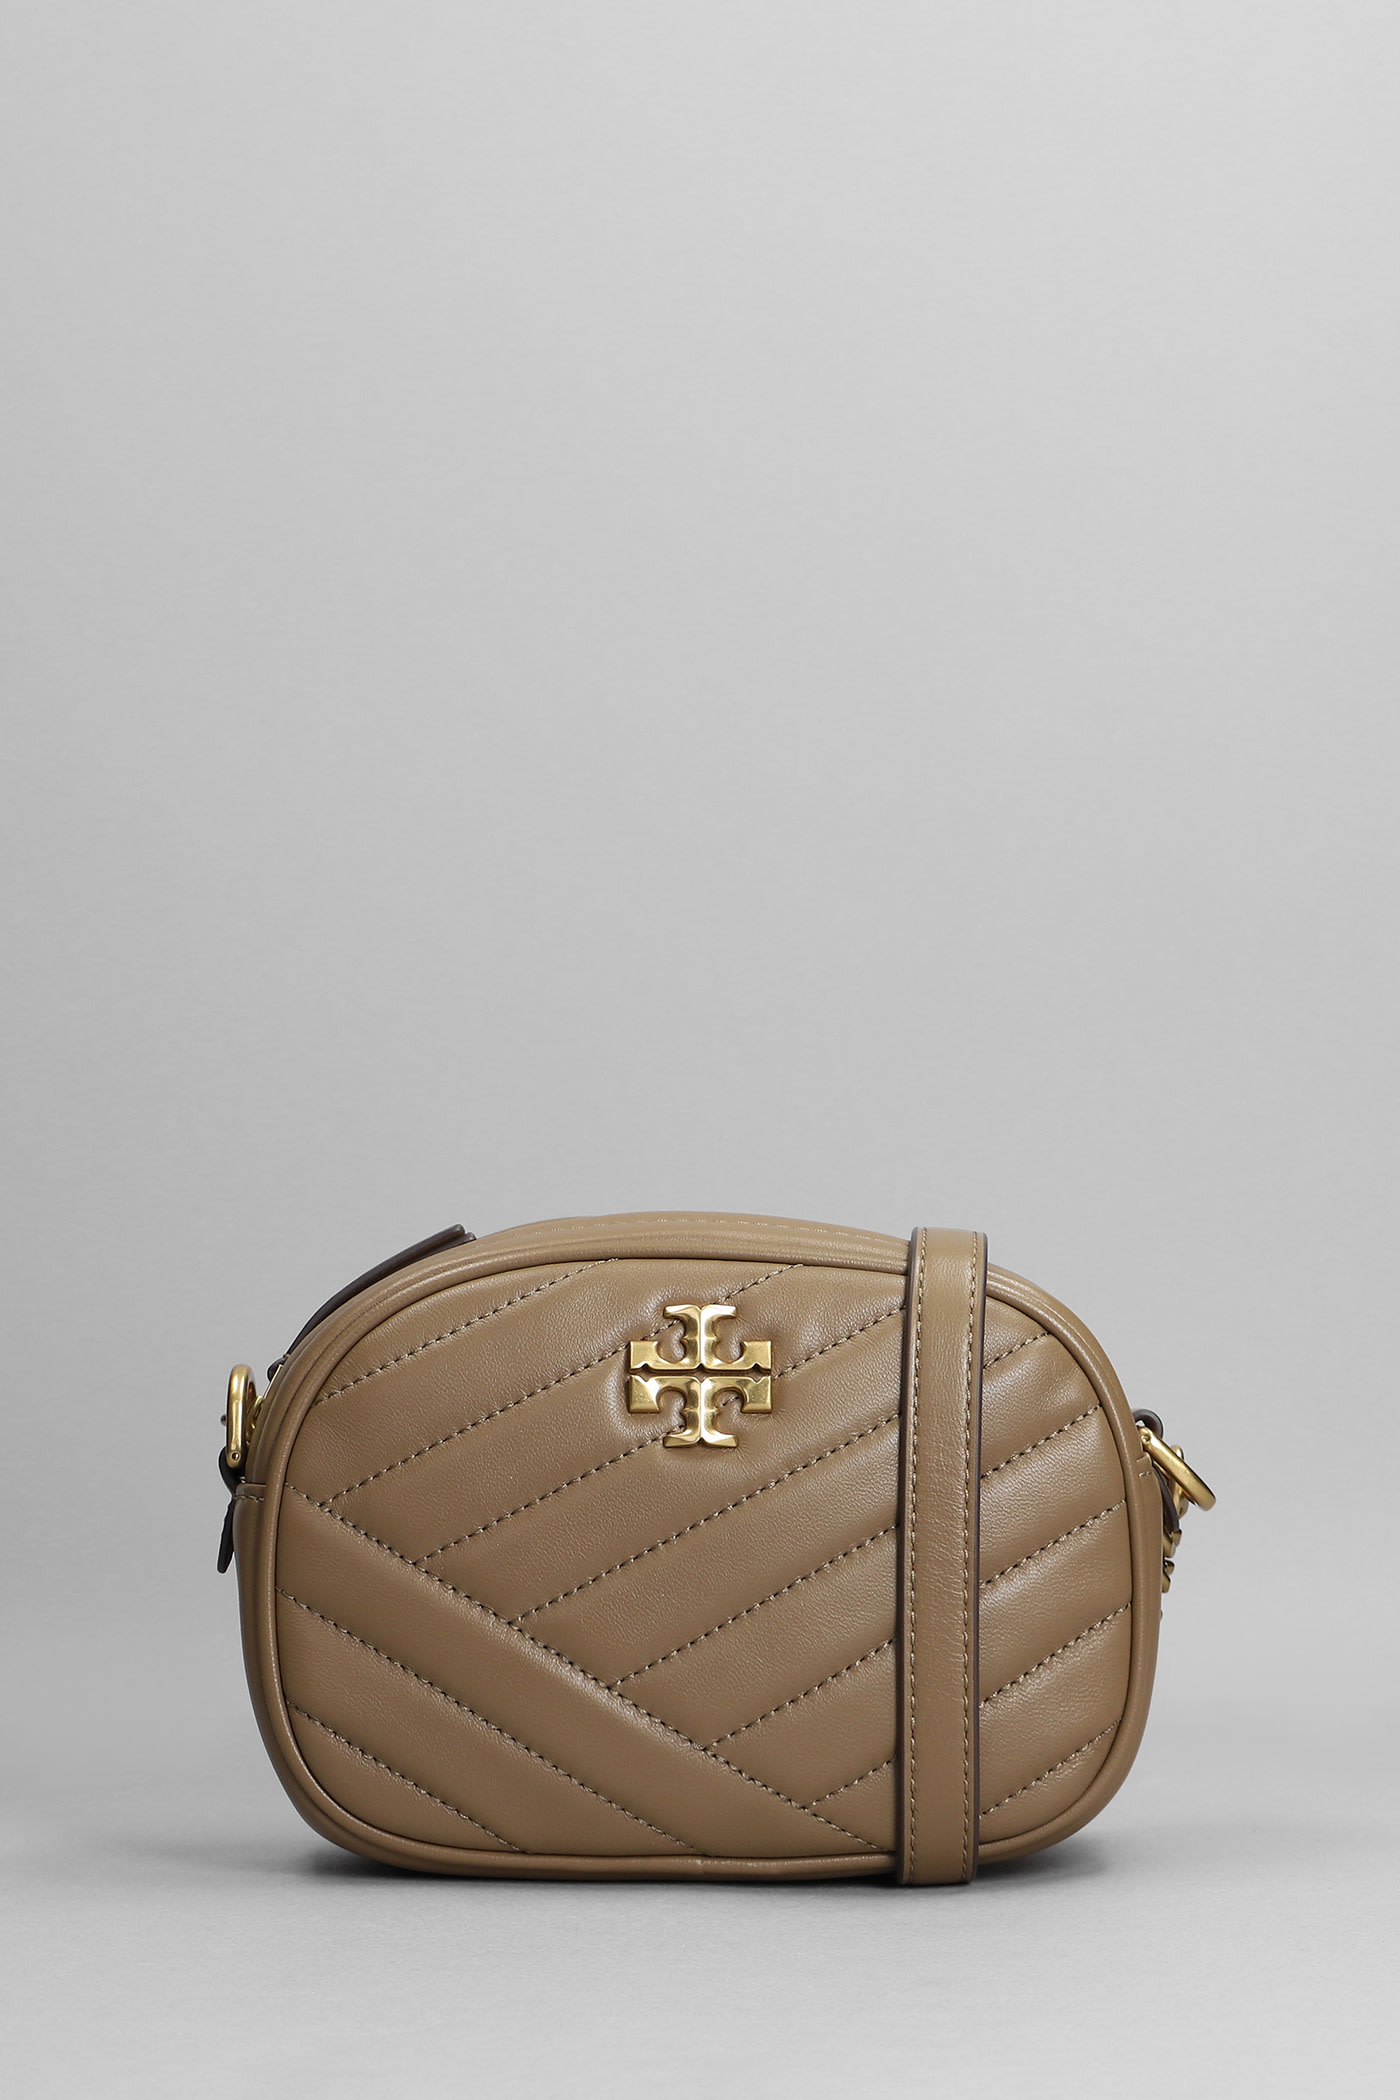 Tory Burch Kira Shoulder Bag In Taupe Leather